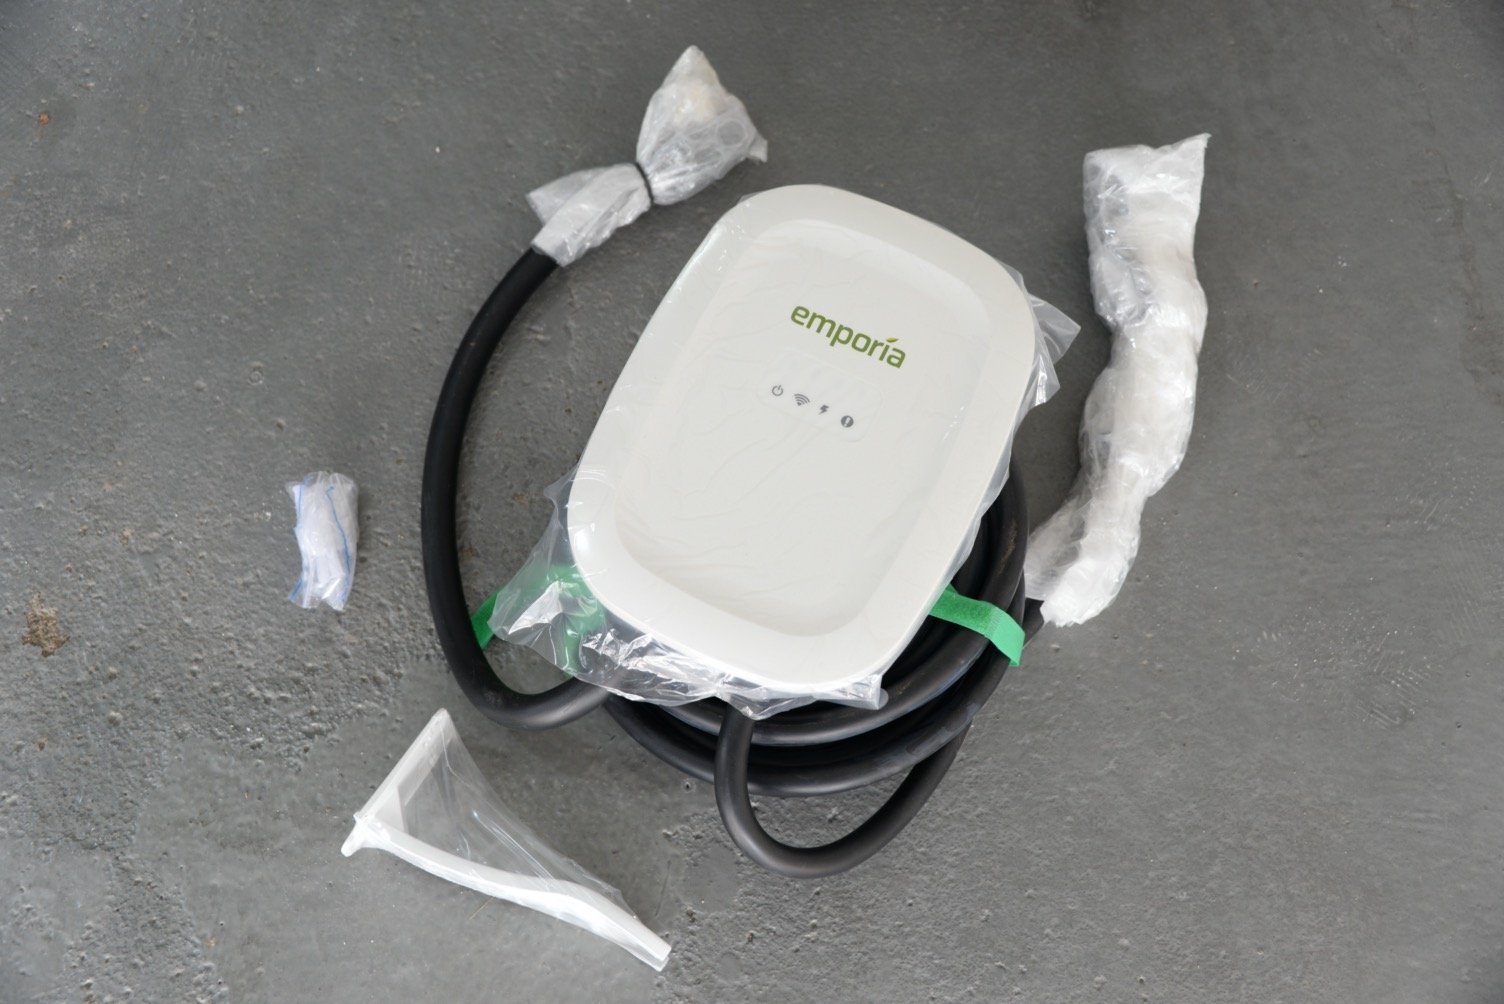 Emporia EV charger unboxing, on ground 